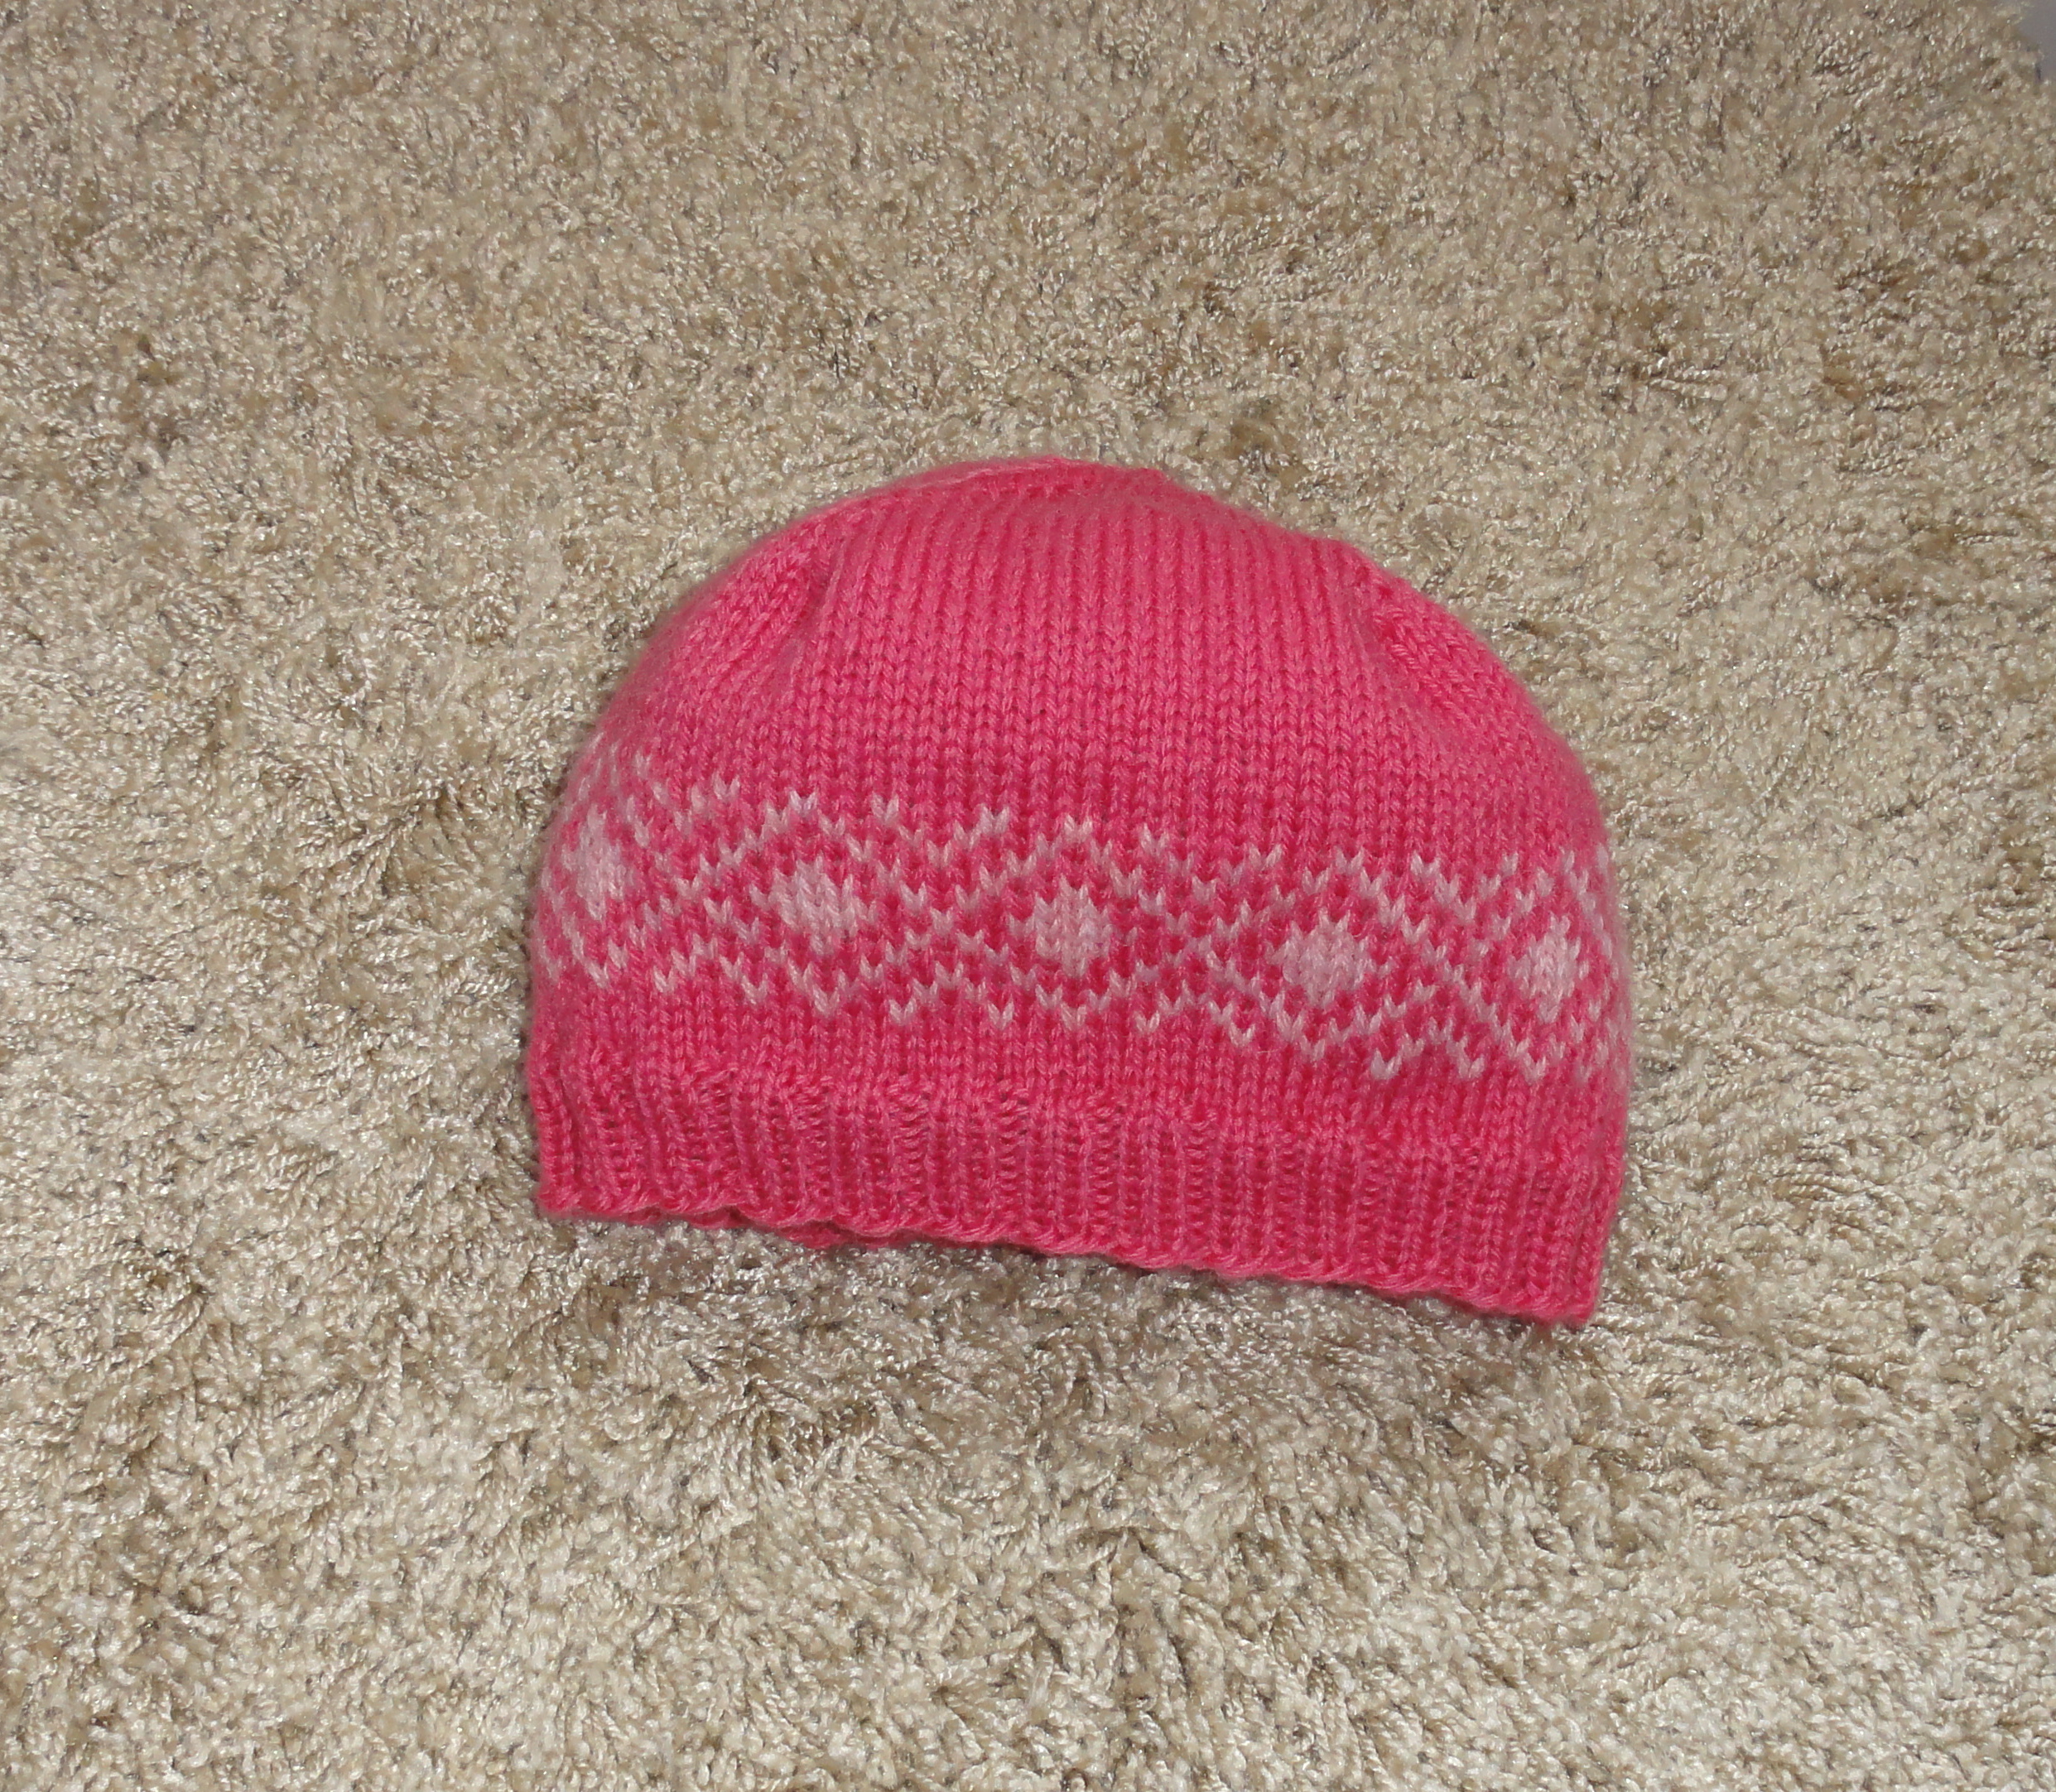 Easy Knit Hat Pattern - Instructables - Make, How To, and DIY